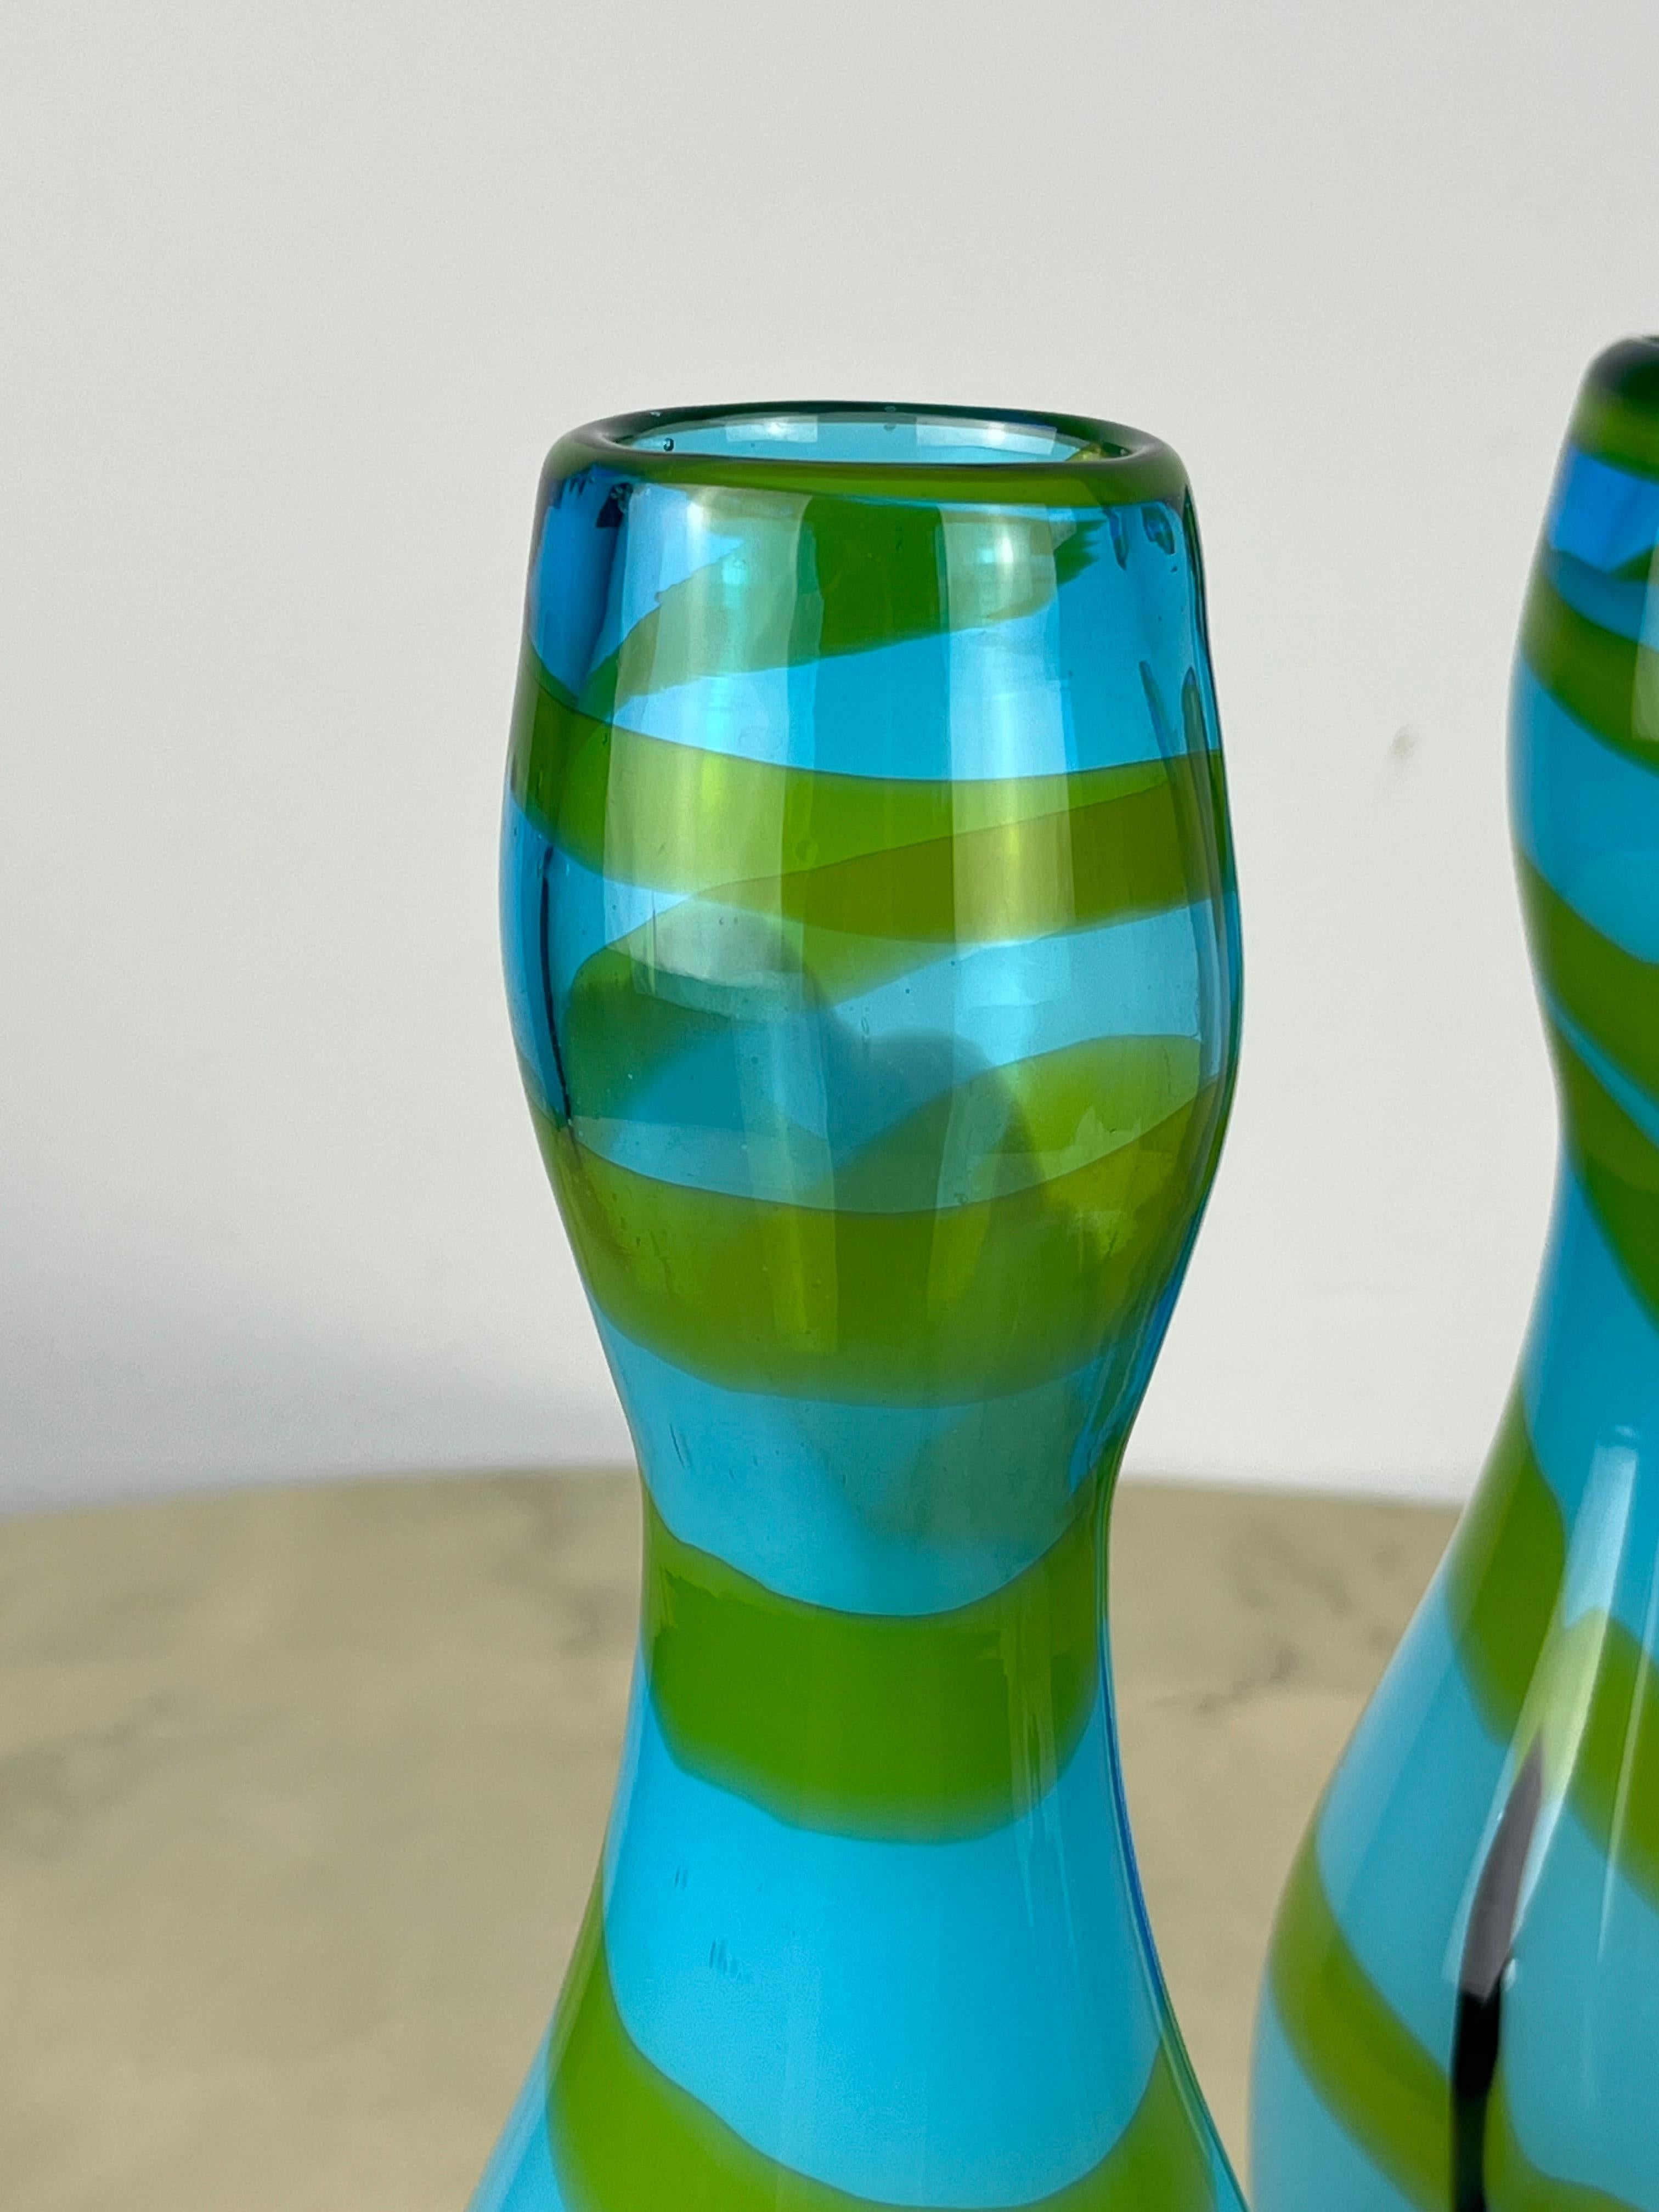 Italian Pair of Polychrome Murano Vases Attributed To Gio Ponti 1970s For Sale